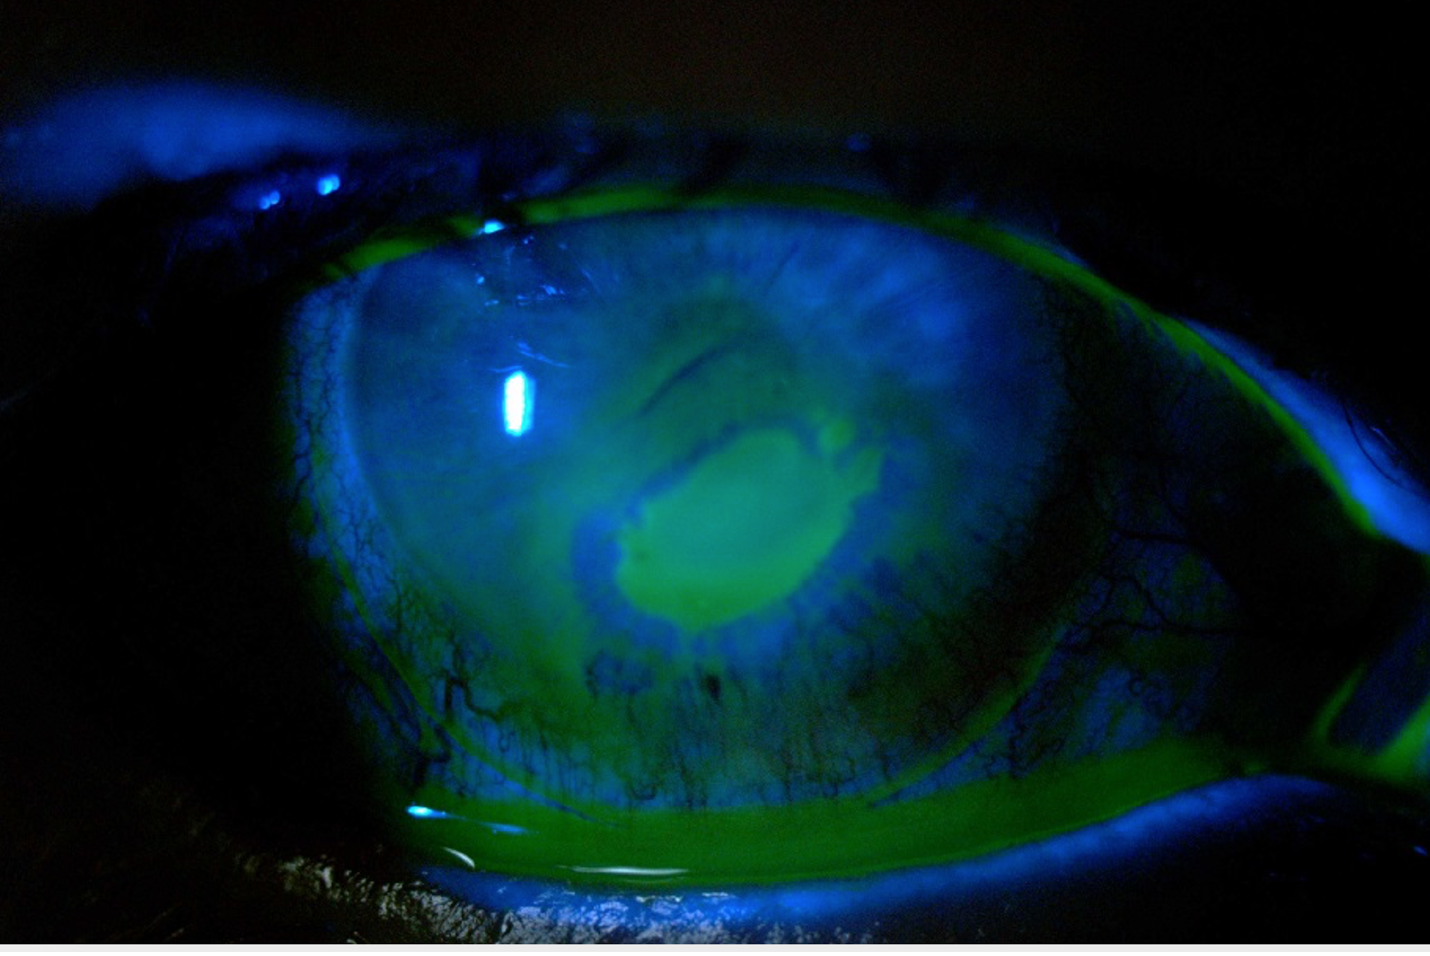 Fig. 3. Persistent epithelial defects can occur from loss of corneal innervation from dry eye.